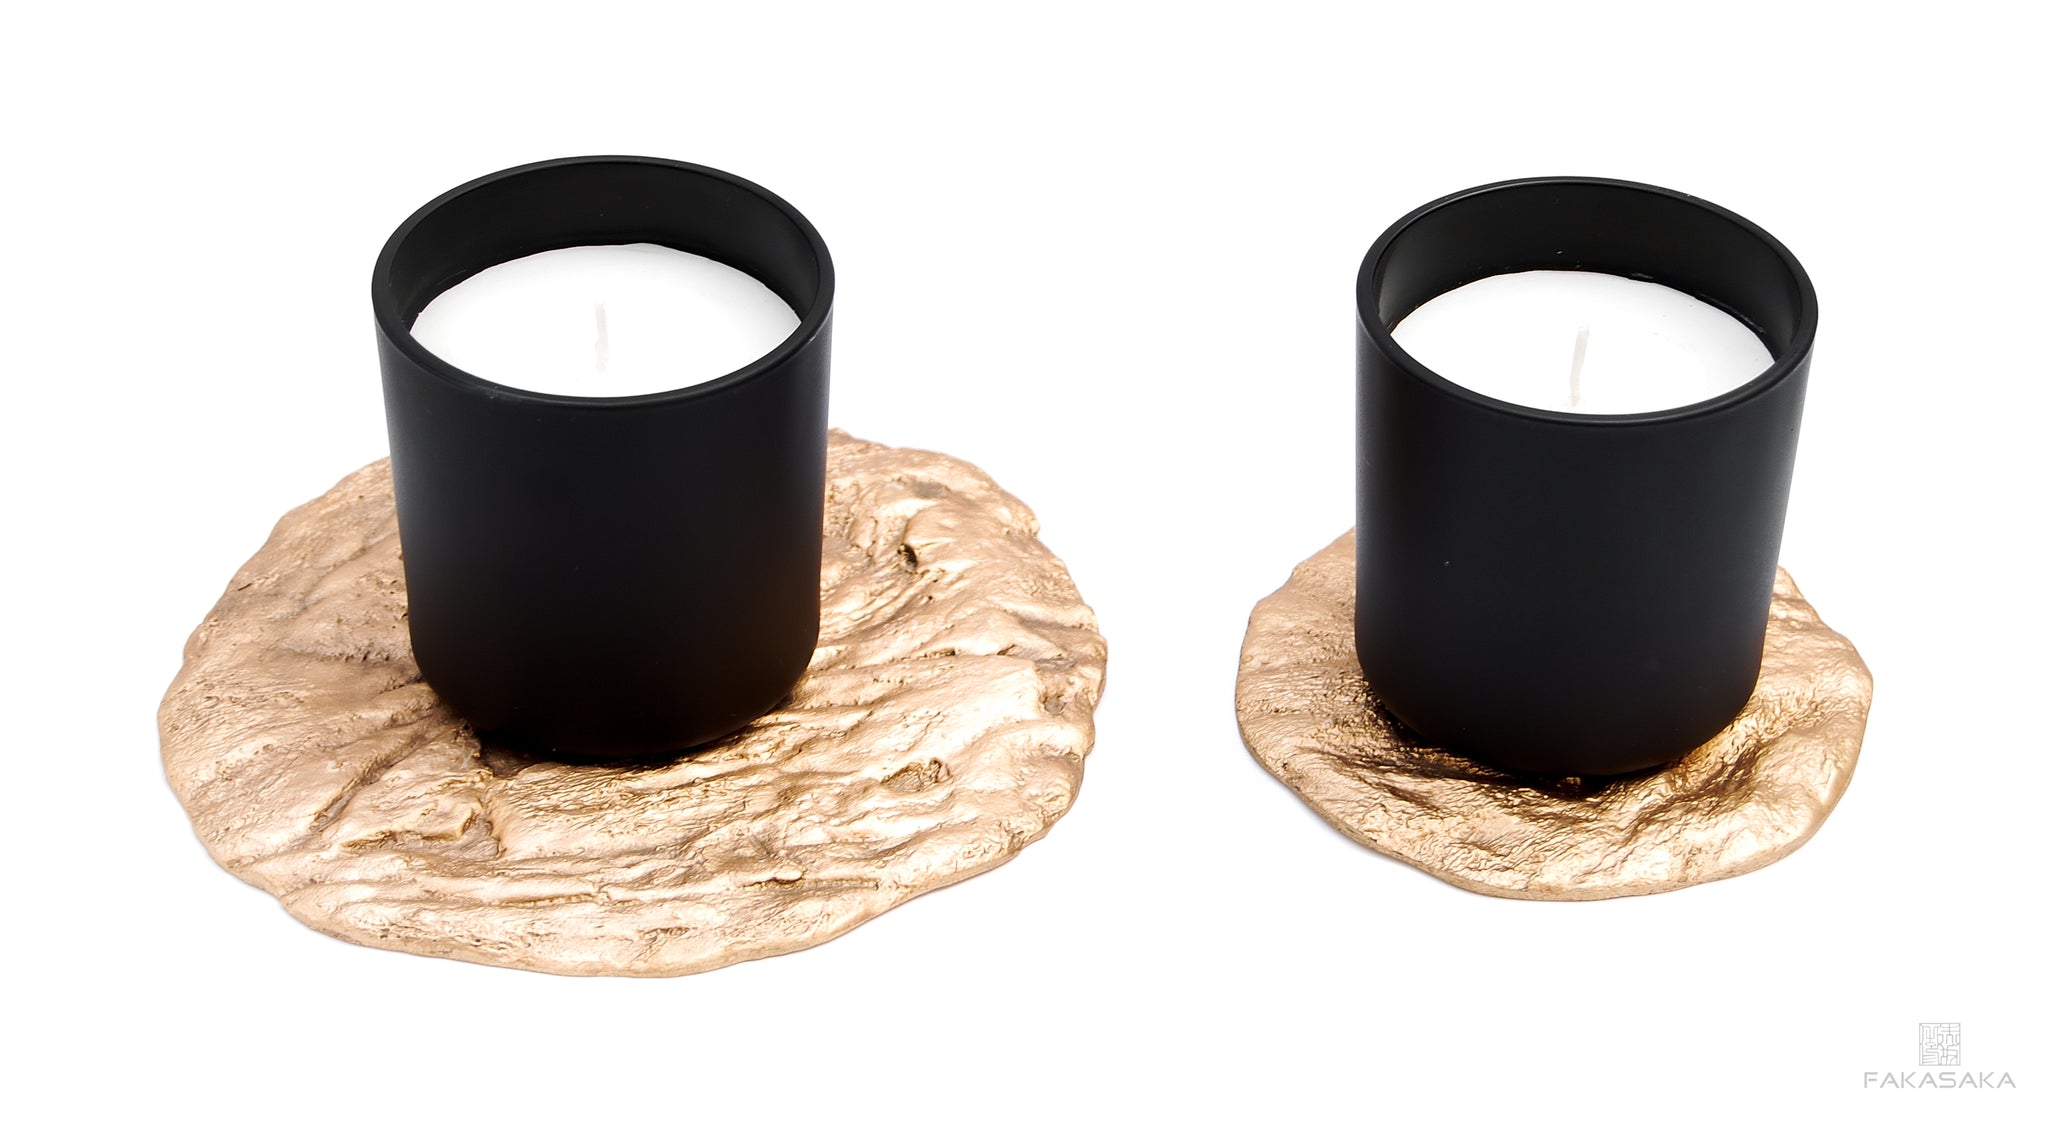 BRUTALIST COASTER 1<br><br>CUP COASTER  / BOTTLE COASTER  / CANDLE TRAY / SMALL TRAY<br><br>POLISHED BRONZE